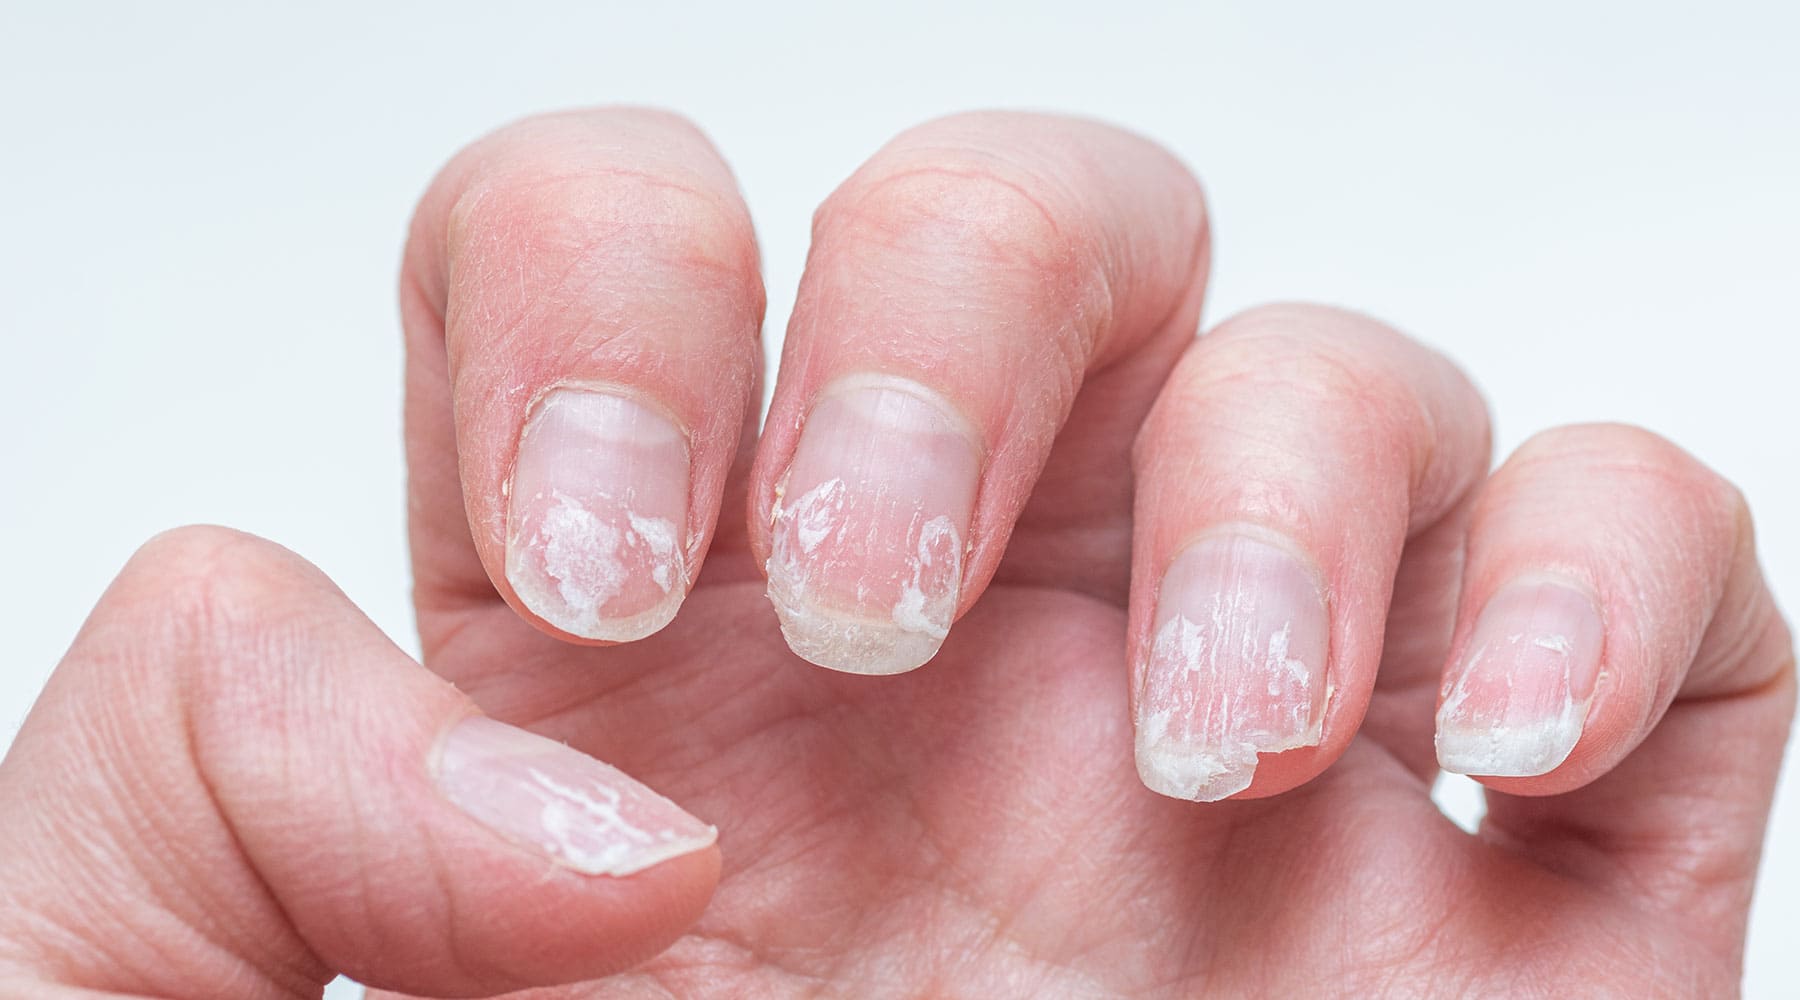 Nail Psoriasis & its Management - By Dr. Nitin Hundre | Lybrate